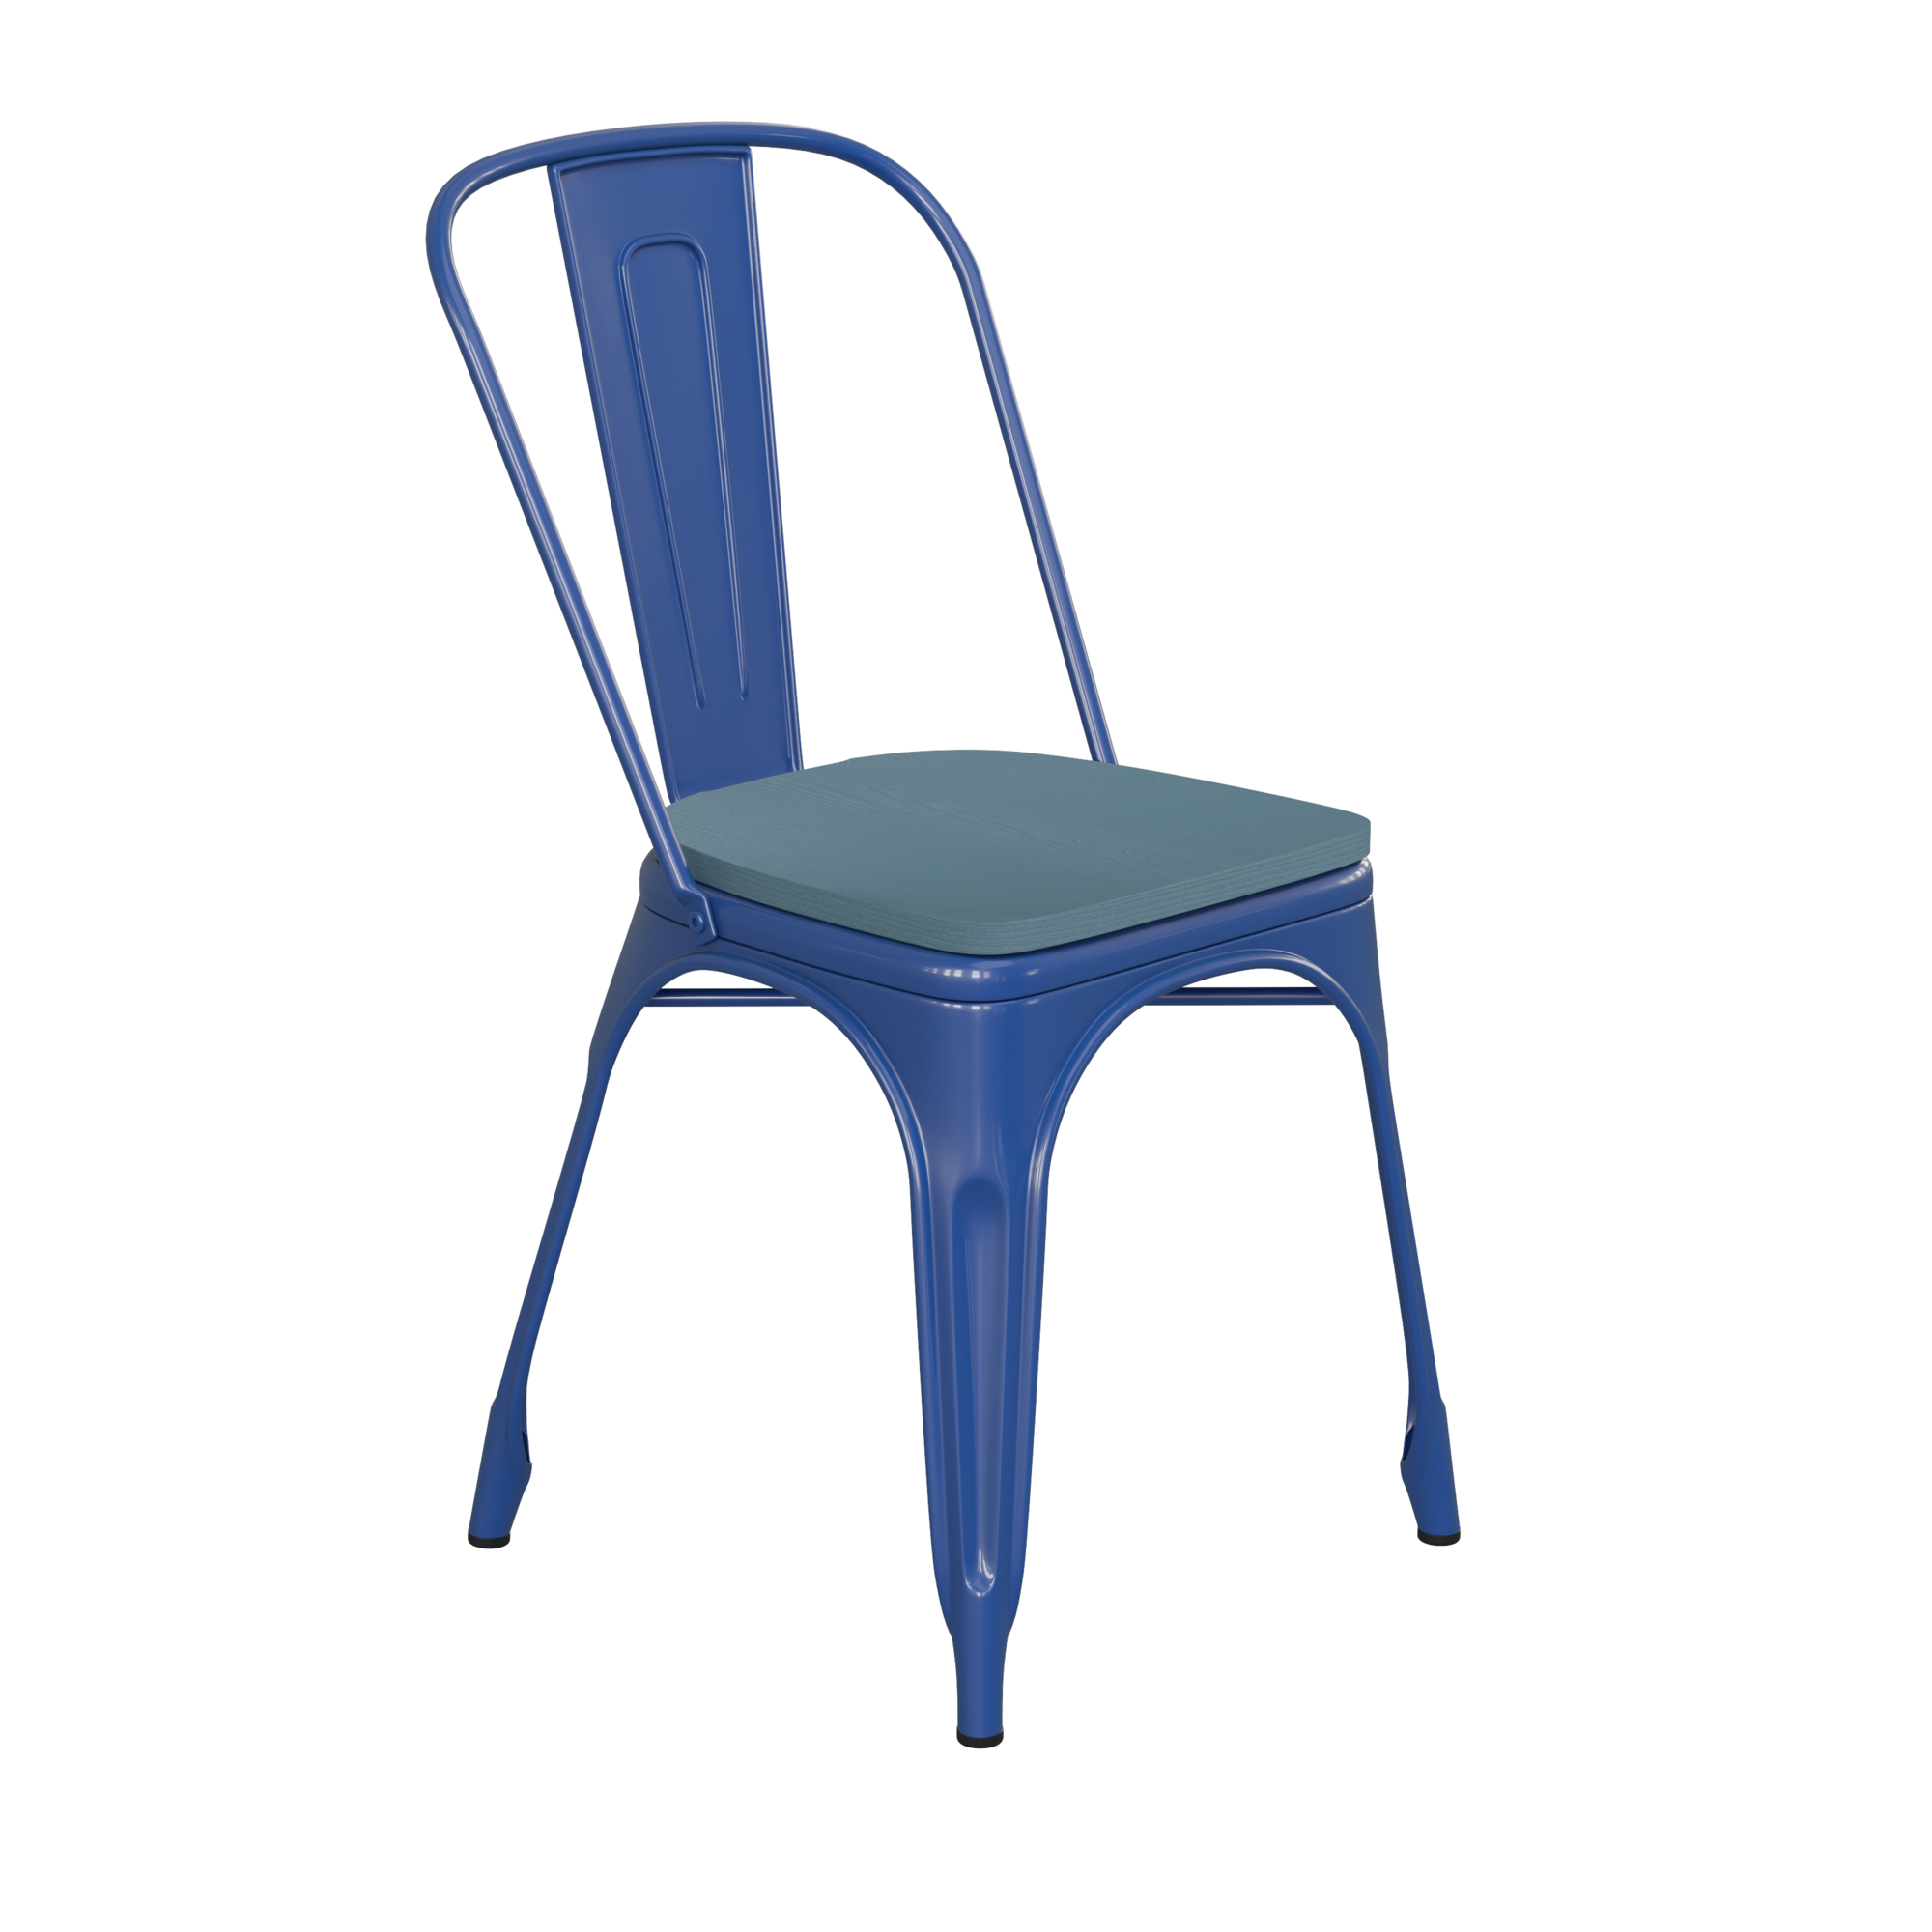 Flash Furniture, Blue Metal Stack Chair with Teal Poly Resin Seat, Primary Color Blue, Included (qty.) 1, Model CH31230BLPL1C